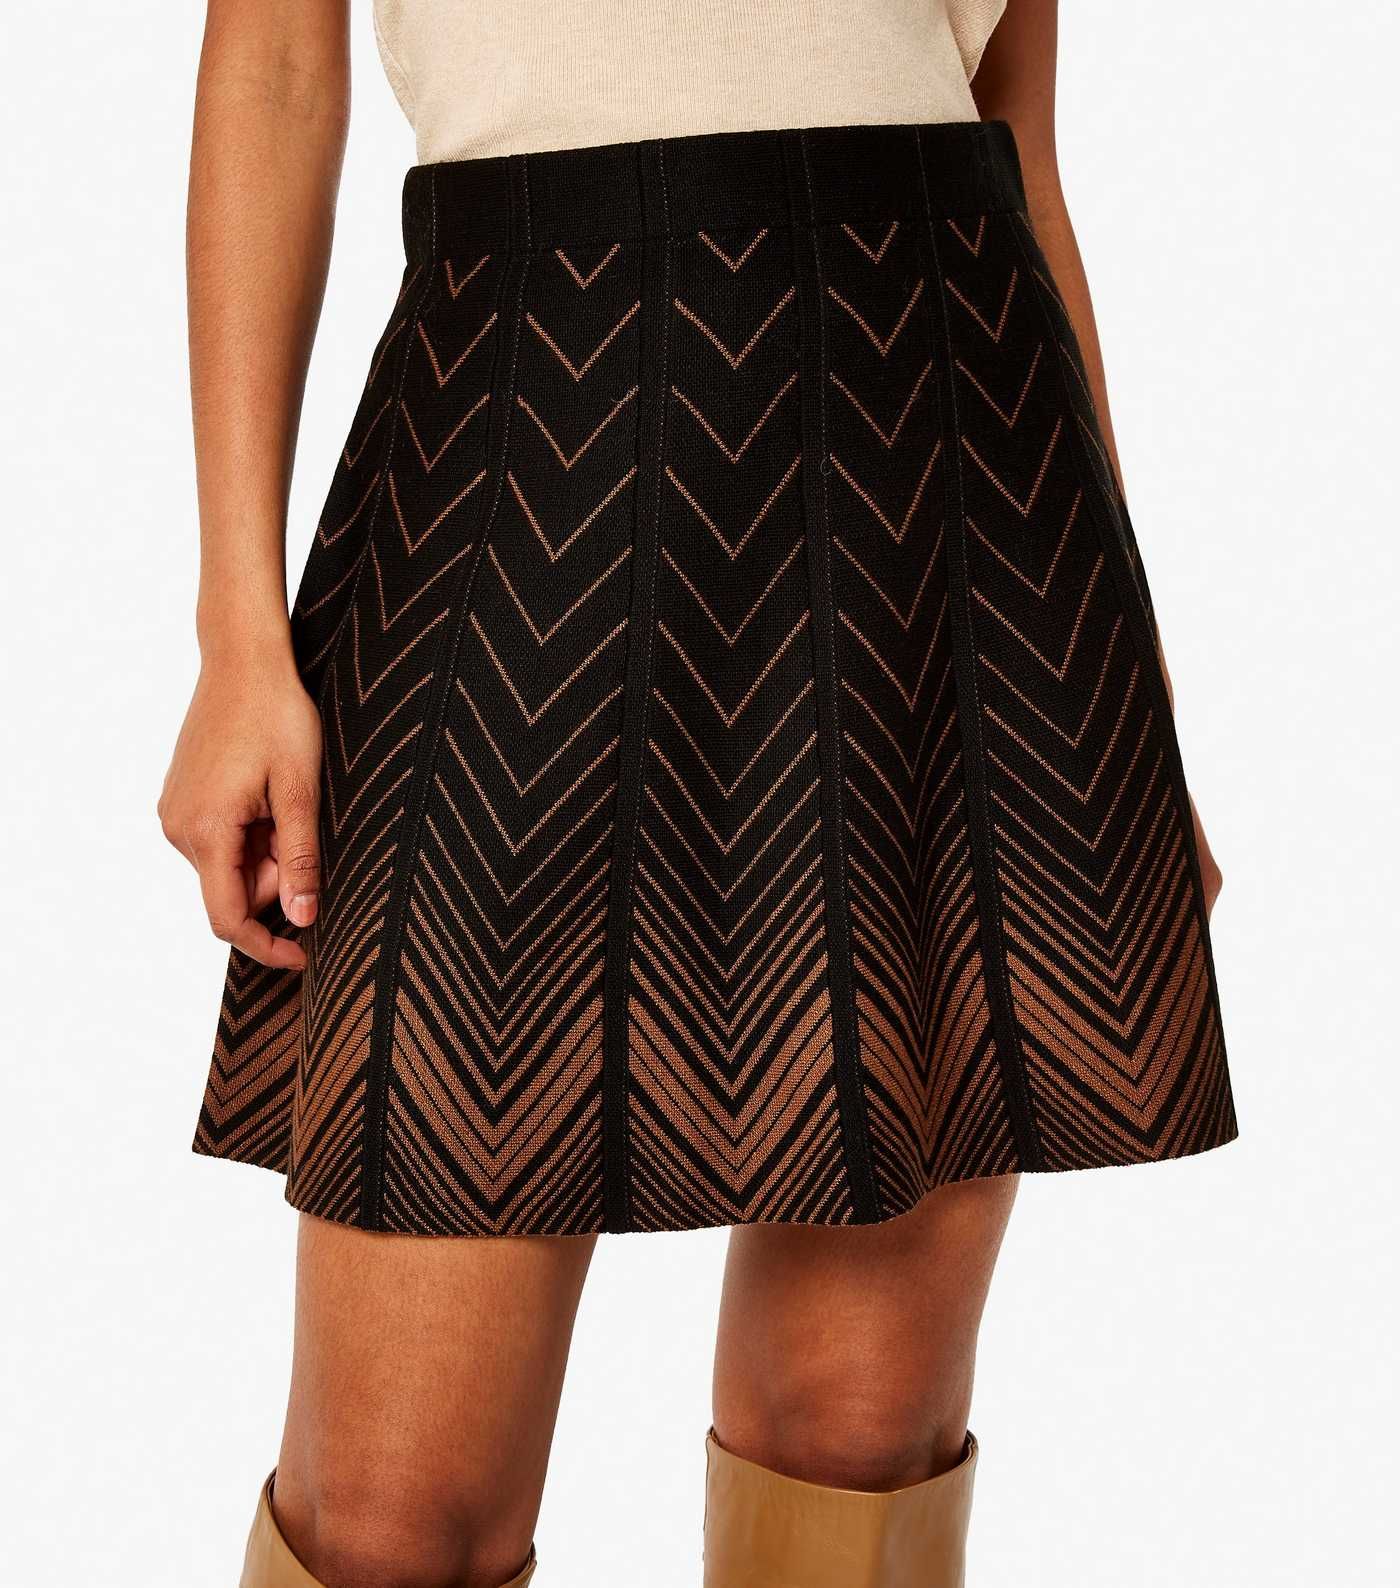 Apricot Black Chevron Knitted Mini Skirt
						
						Add to Saved Items
						Remove from Saved ... | New Look (UK)